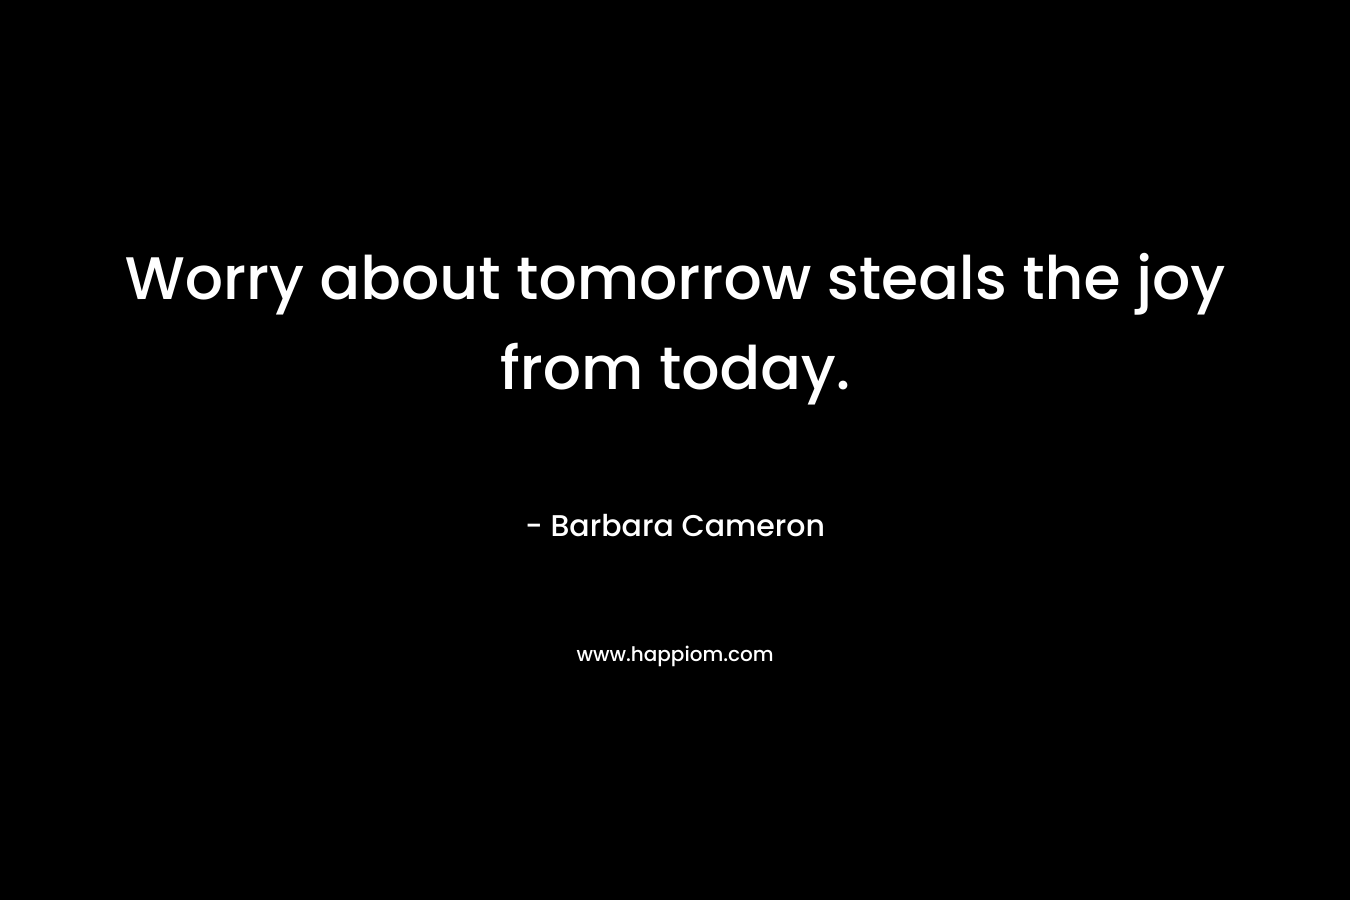 Worry about tomorrow steals the joy from today.